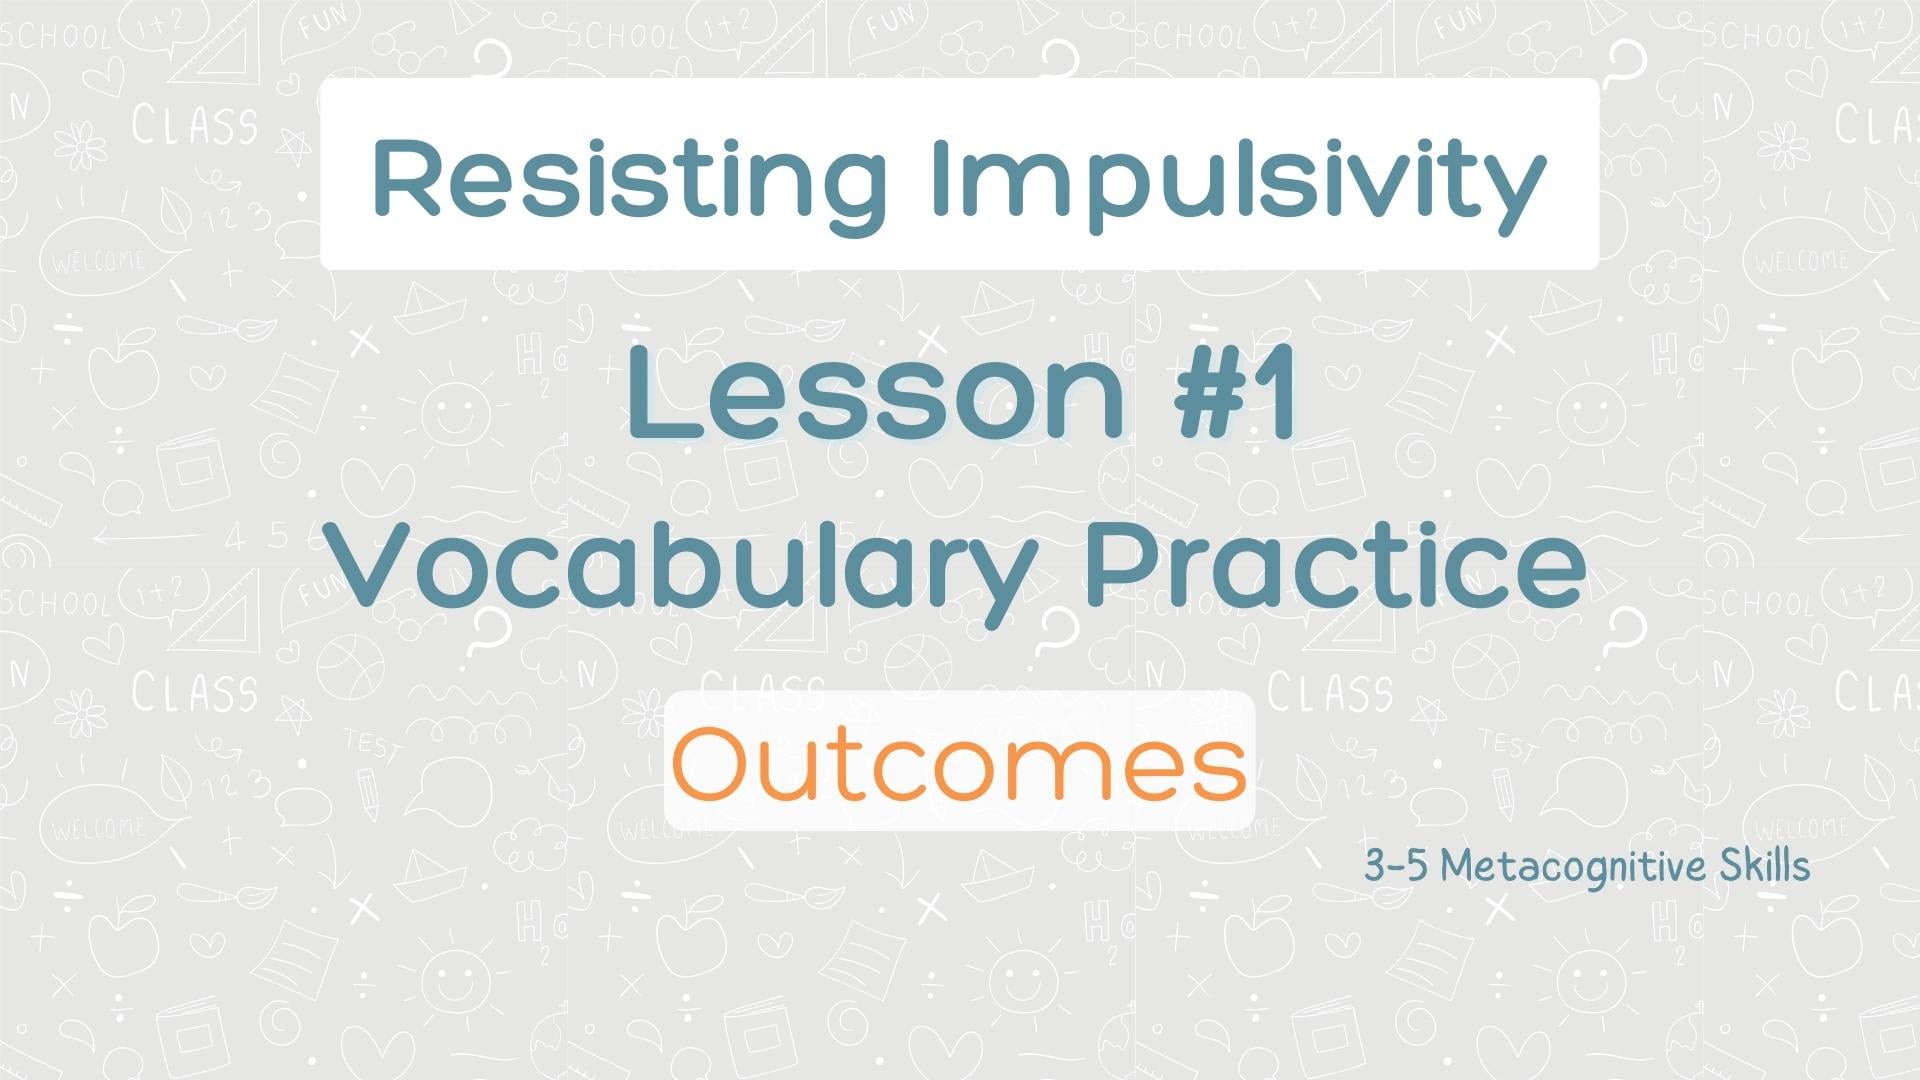 Lesson #1 Vocabulary Practice: Outcomes video thumbnail